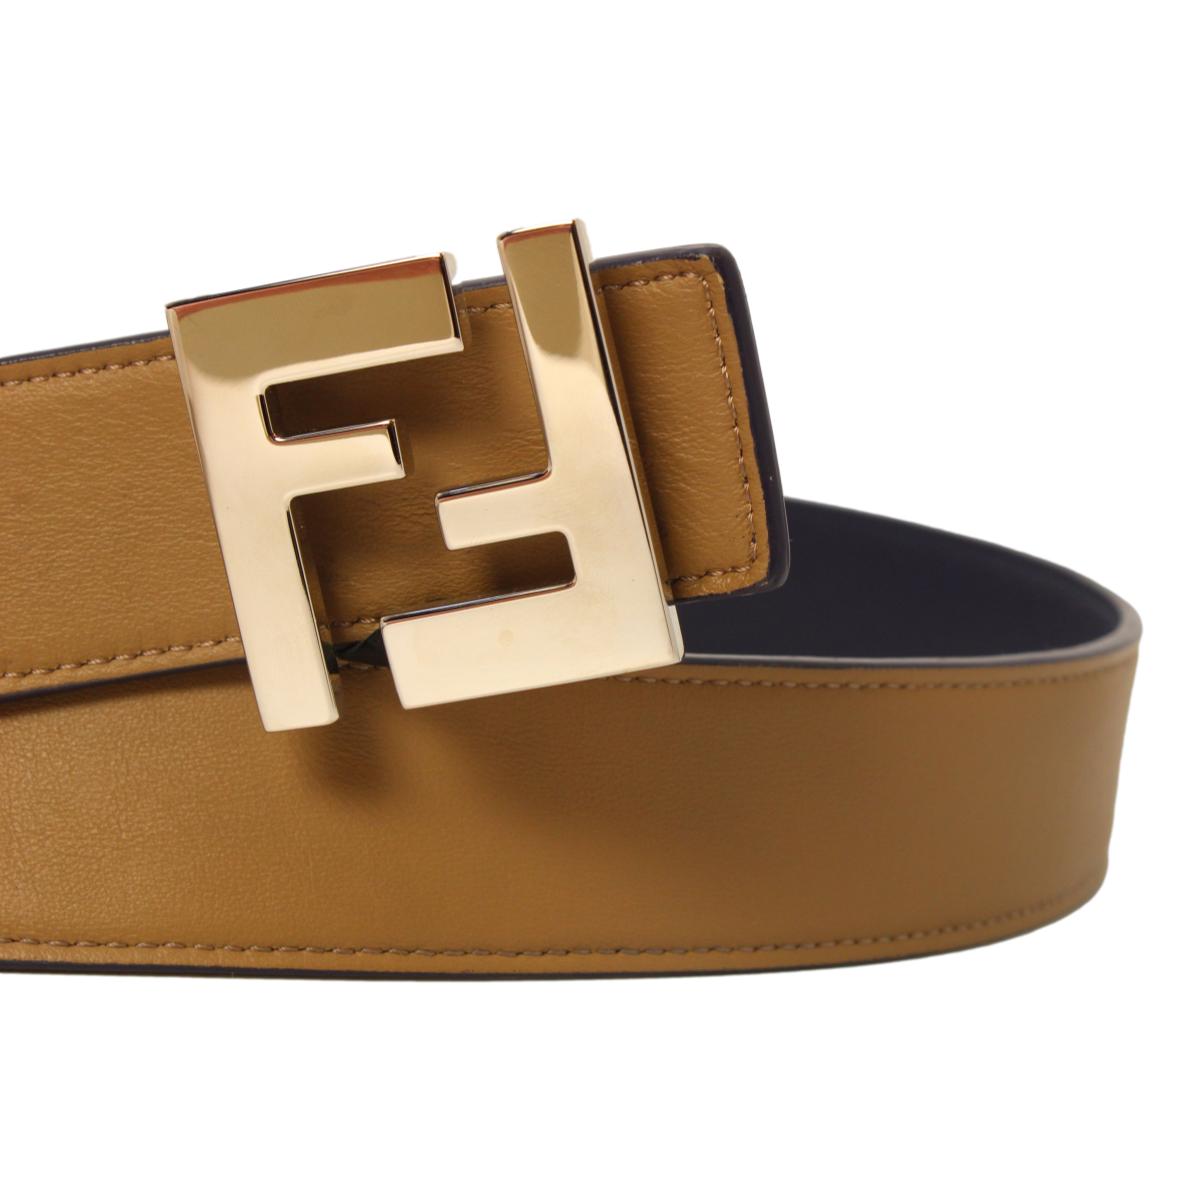 Fendi Reversible Brown Blue Leather FF Belt Size 110/44 7C0424 at_Queen_Bee_of_Beverly_Hills